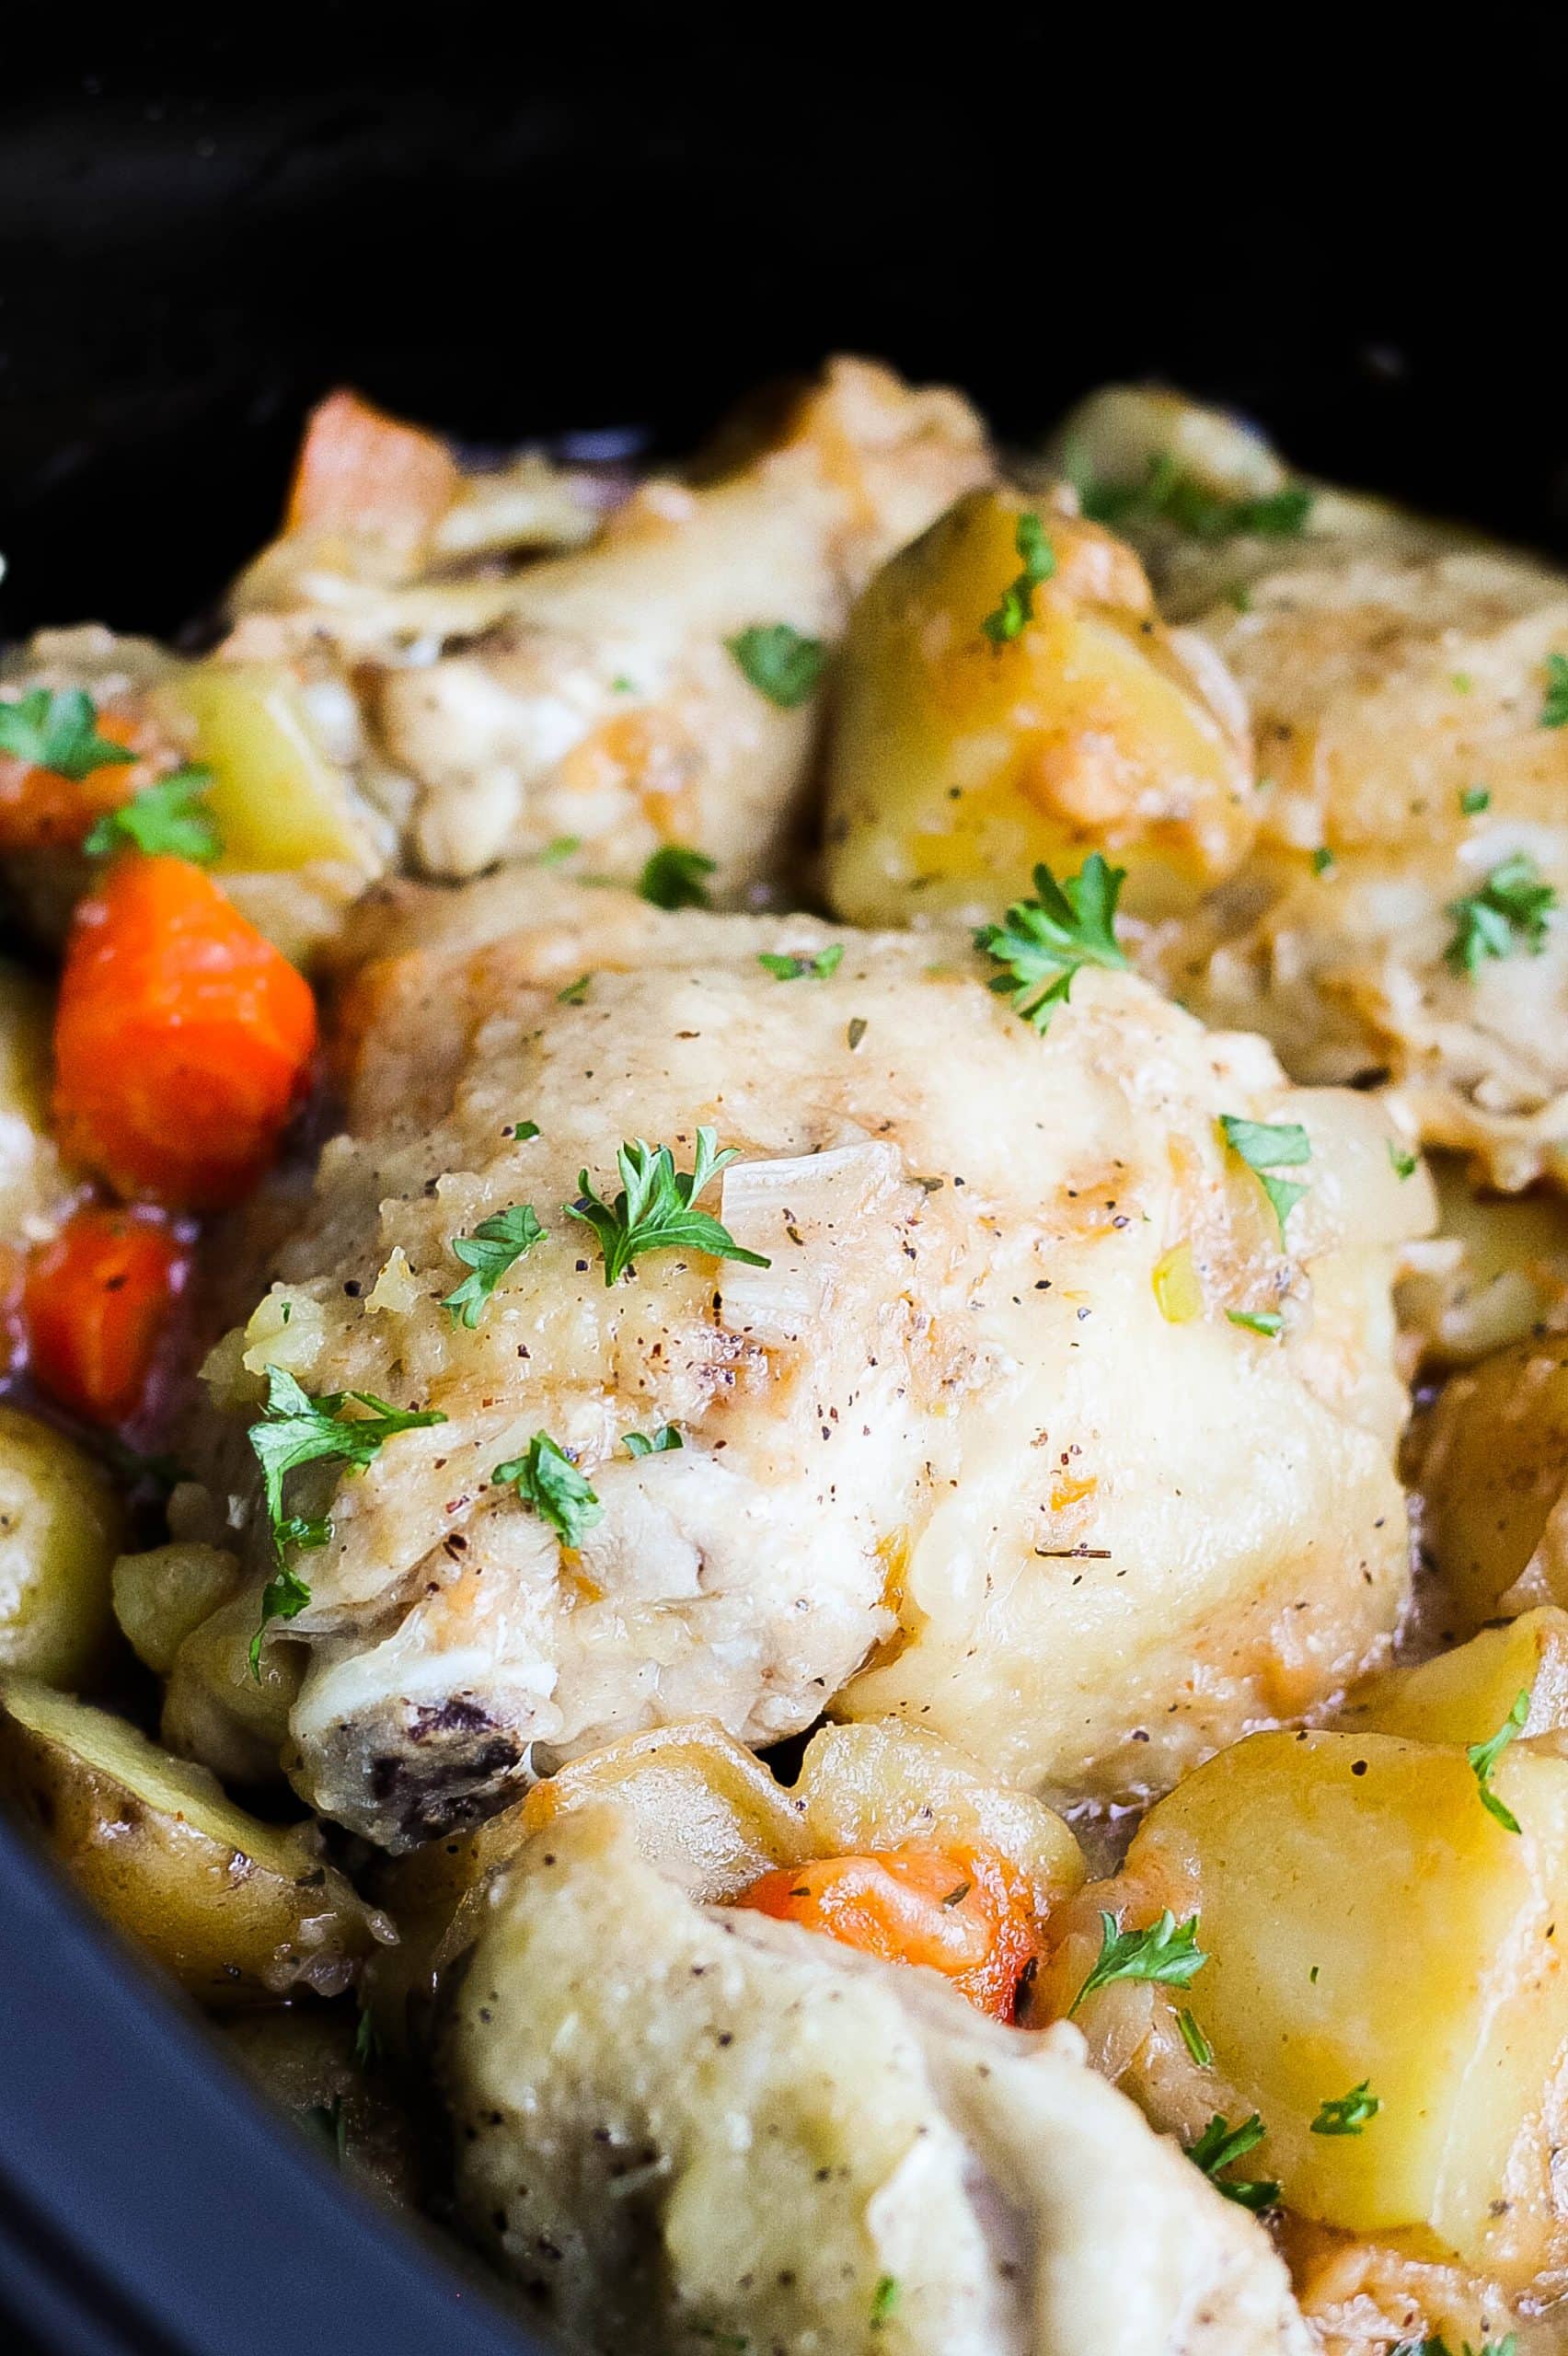 Chicken and Potatoes